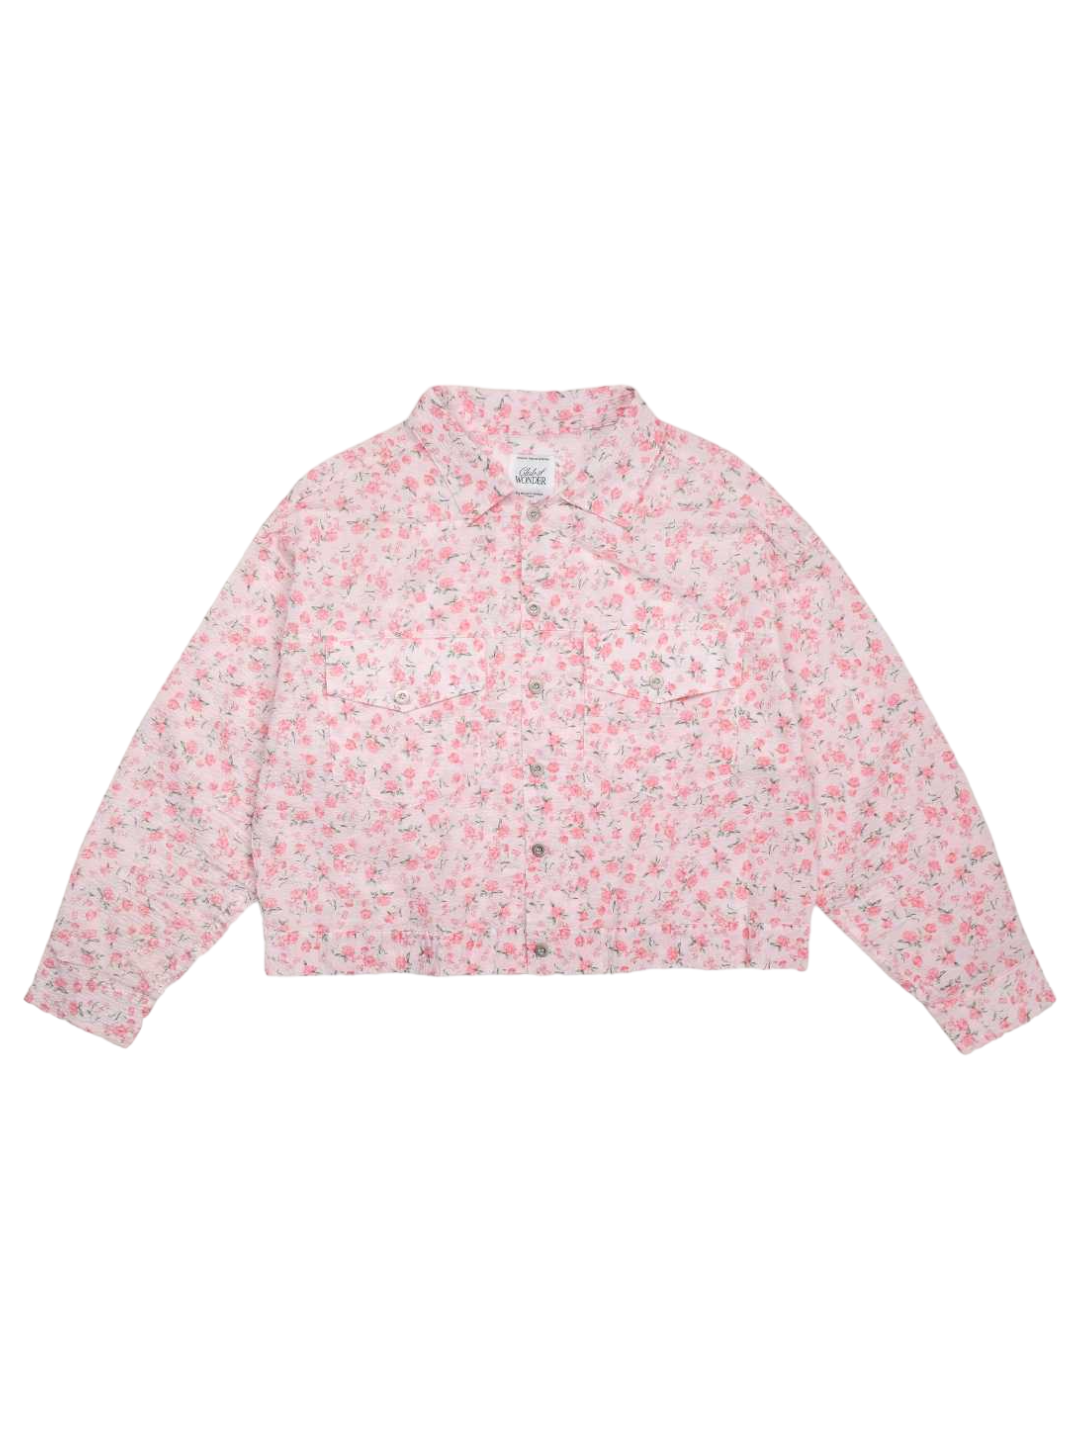 CLUB ✿ 07 Club Cropped Textured Jacket in Floral Pink